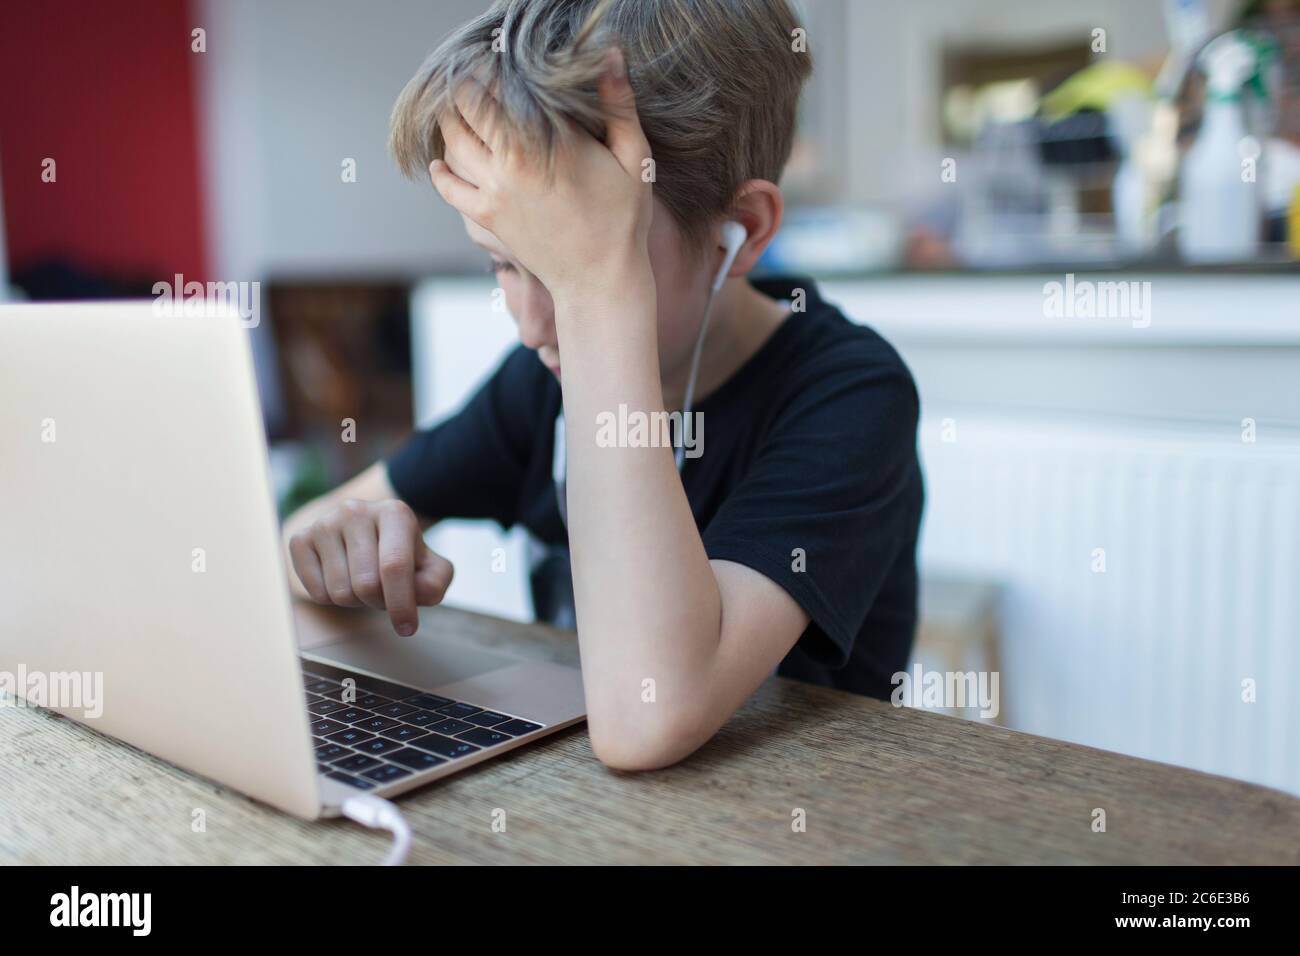 Frustrated boy with headphones homeschooling at laptop Stock Photo